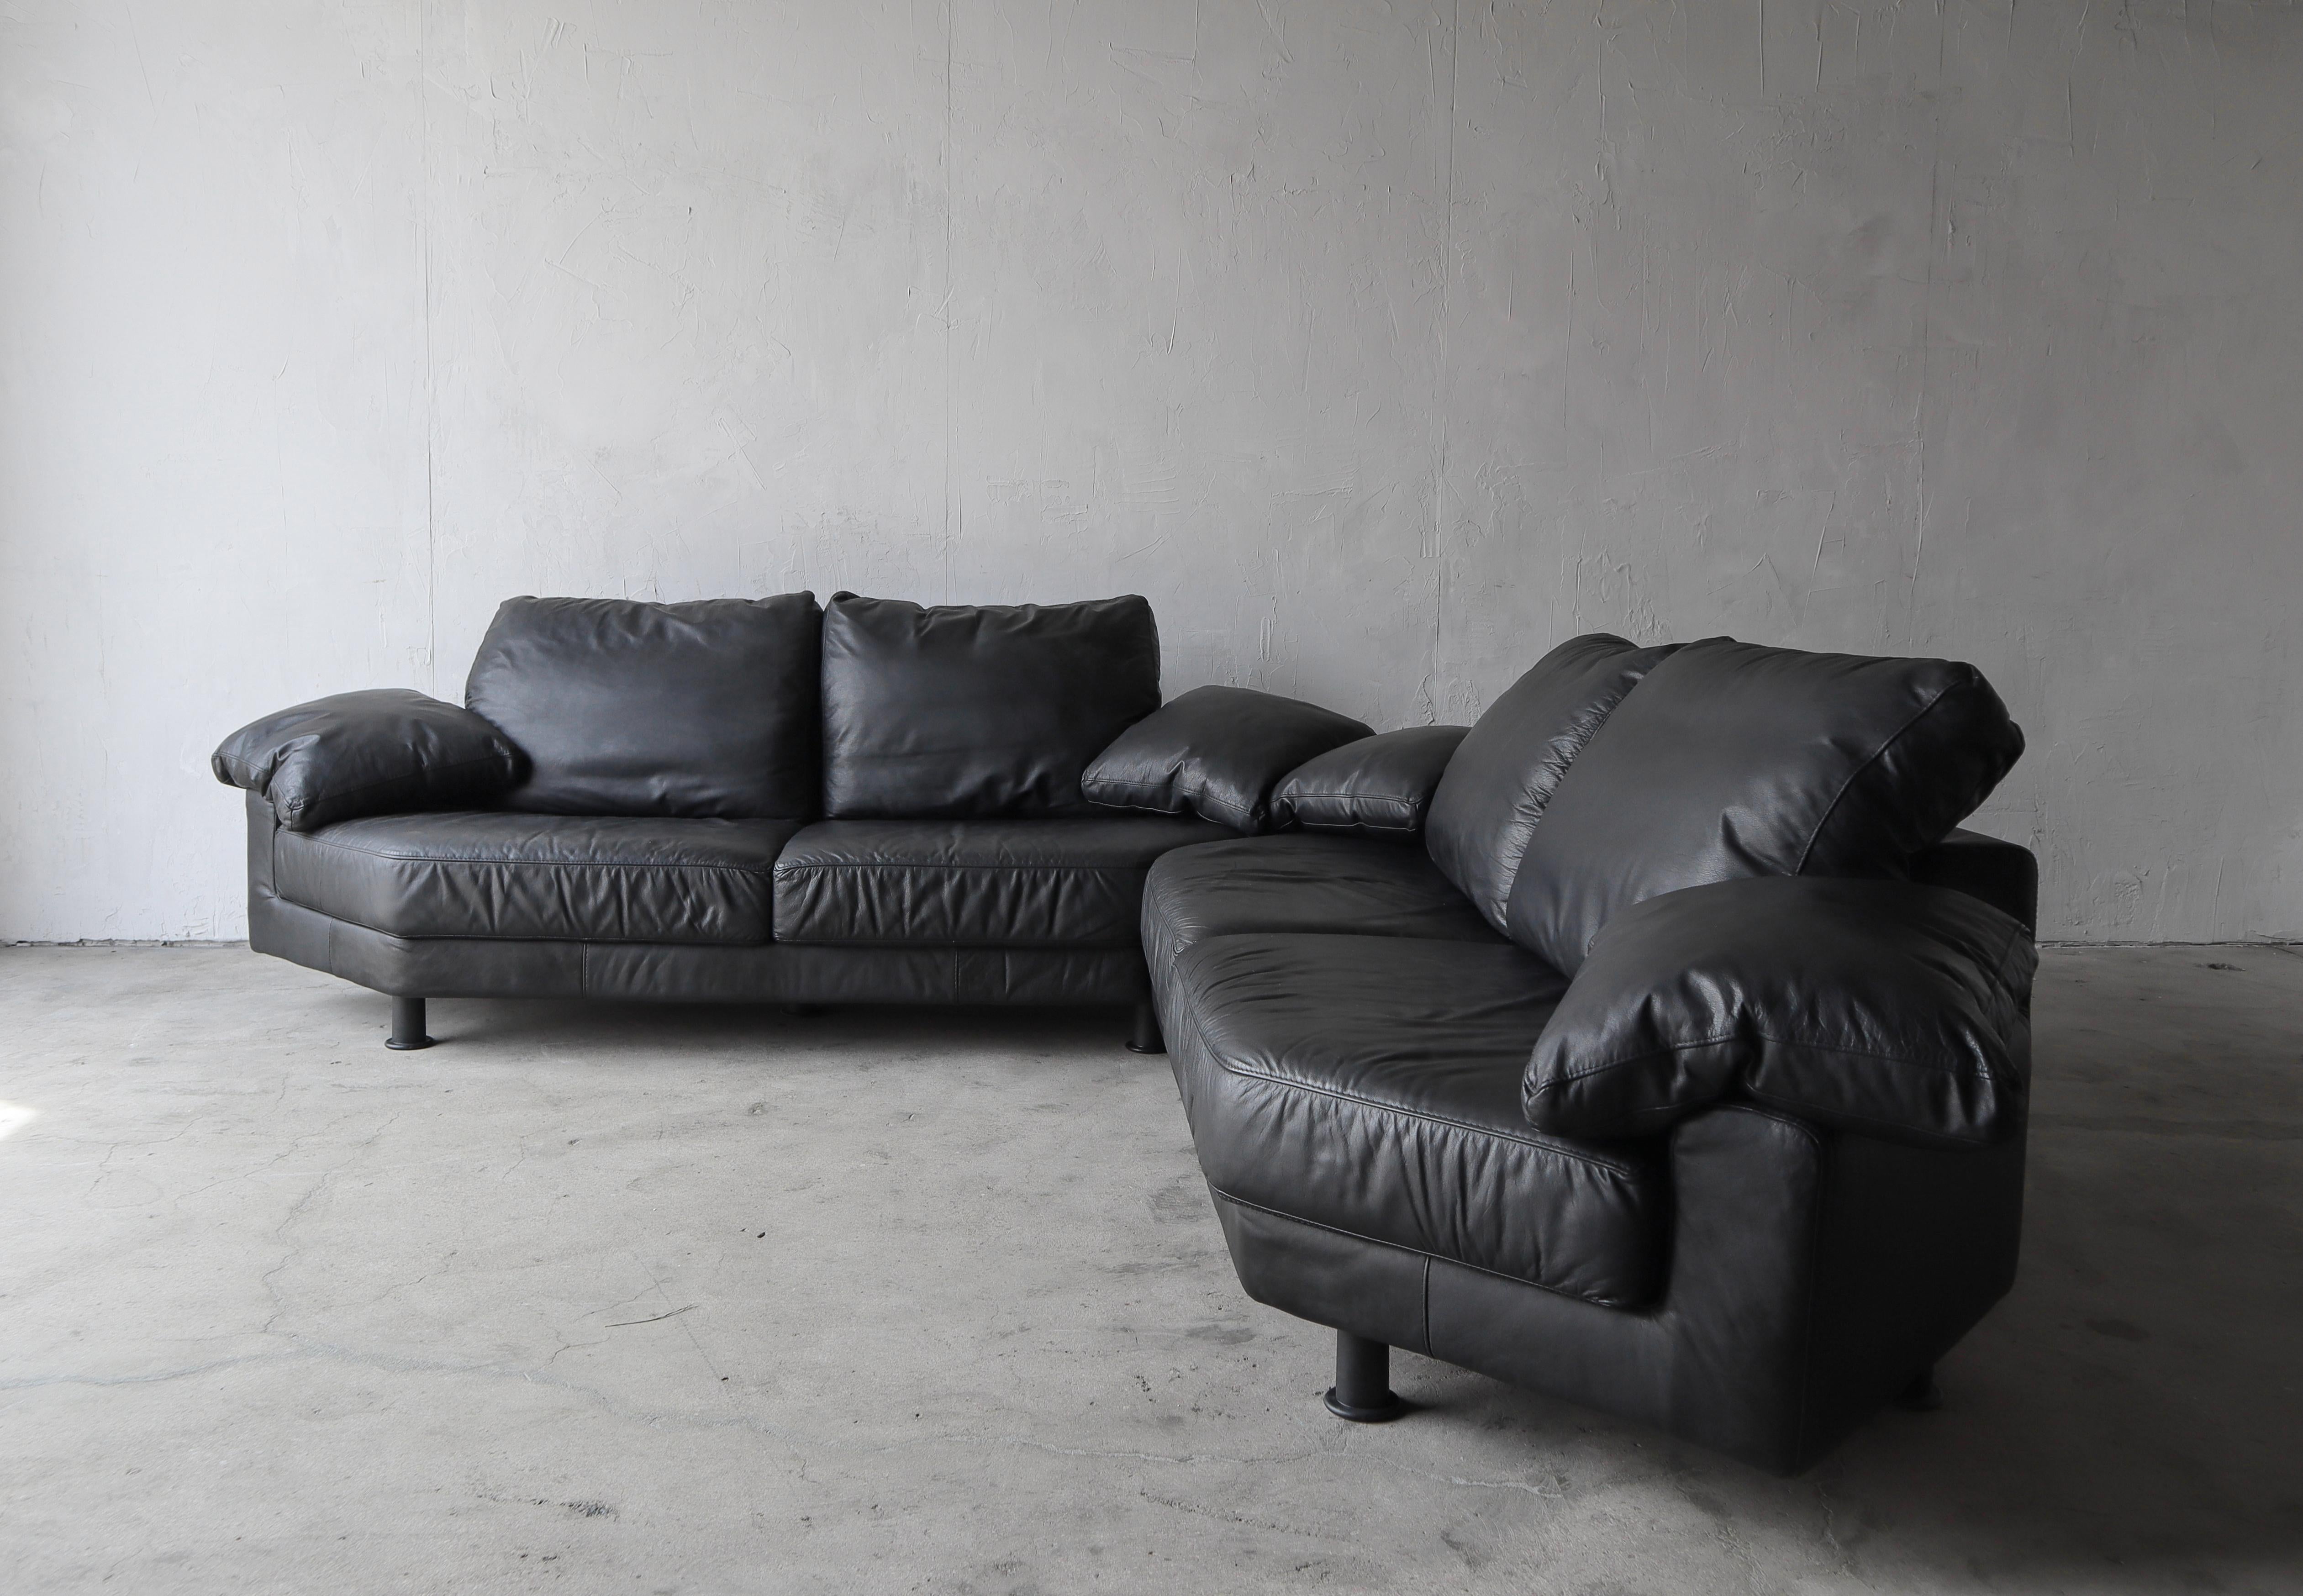 Post modern black italian leather modular sofa, set features 2 identical sofas and 2 ottomans that can be put together in multiple configurations. Can also be used individually as 2 sofas. The sofas have attractive angled edges, adding to the post